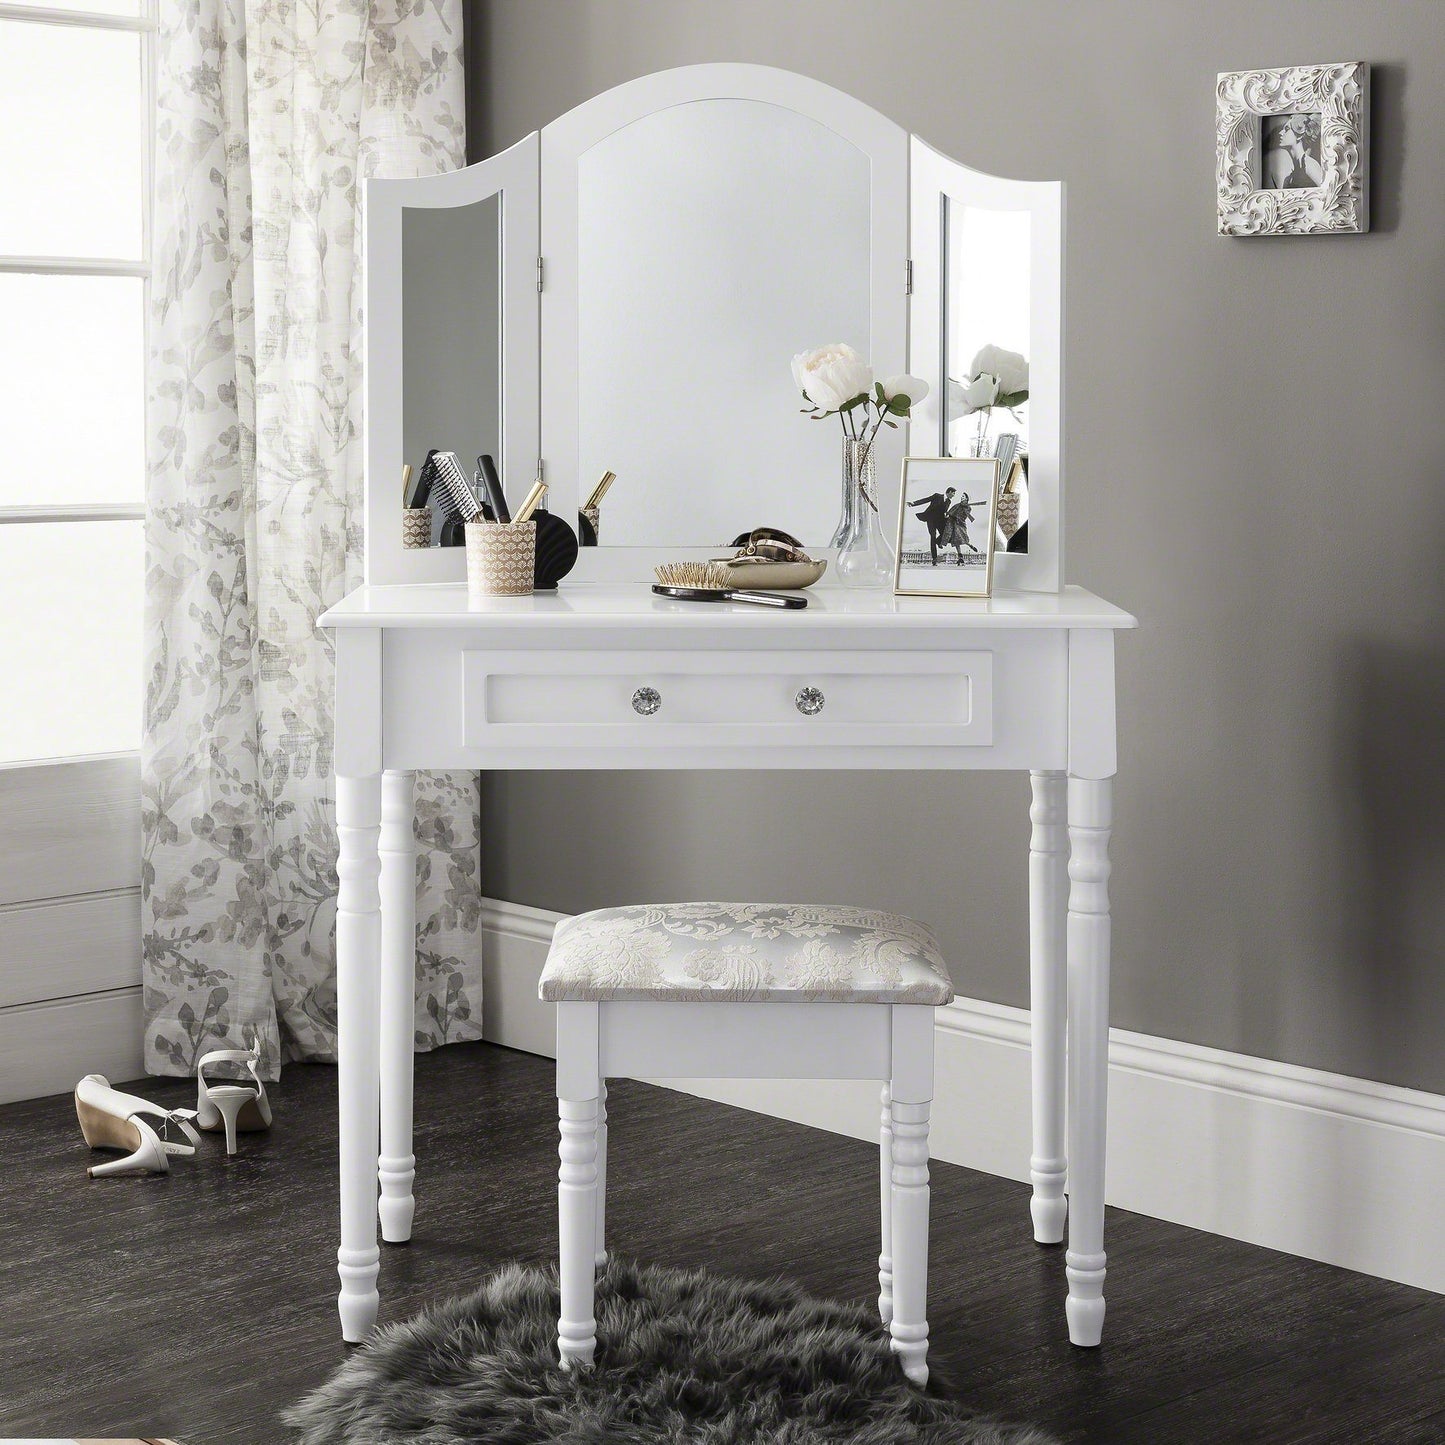 Sienna Dressing Table, Stool & Mirror Set - White Painted - Laura James